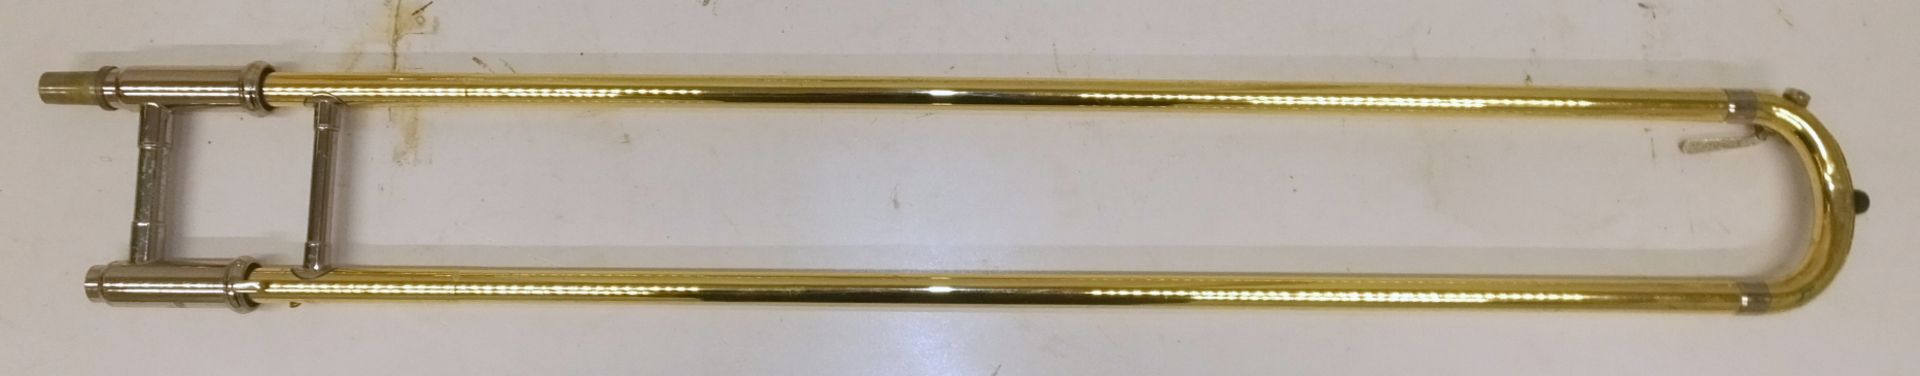 Yamaha Model YSL - 653 Trombone in case - Serial Number - 201606 (damage and dents on instrument) - Image 7 of 15